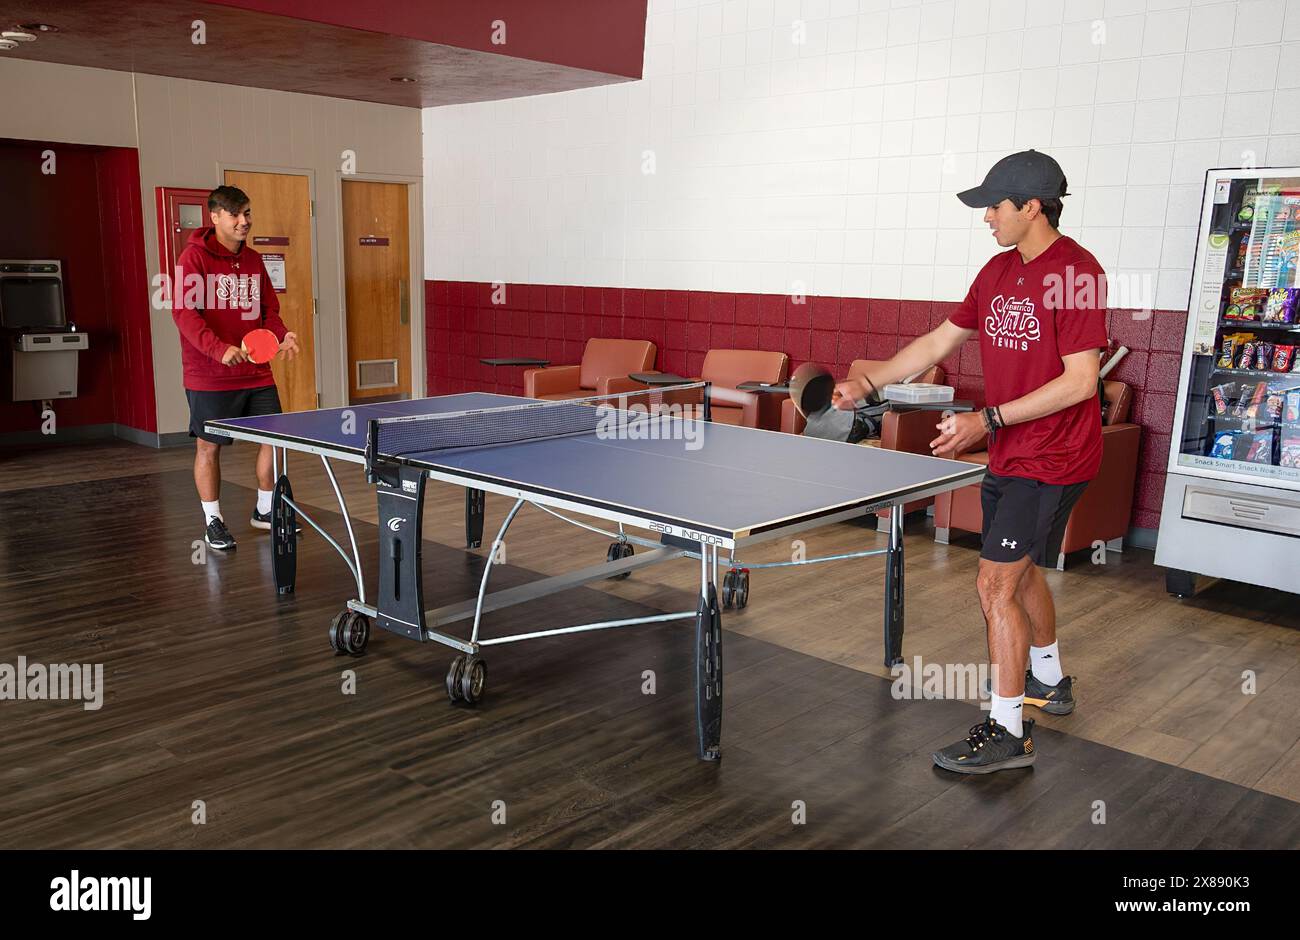 Ping pong or table tennis action by two NMSU students indoors at the American Indian student Center, Las Cruces, NM, USA Stock Photo